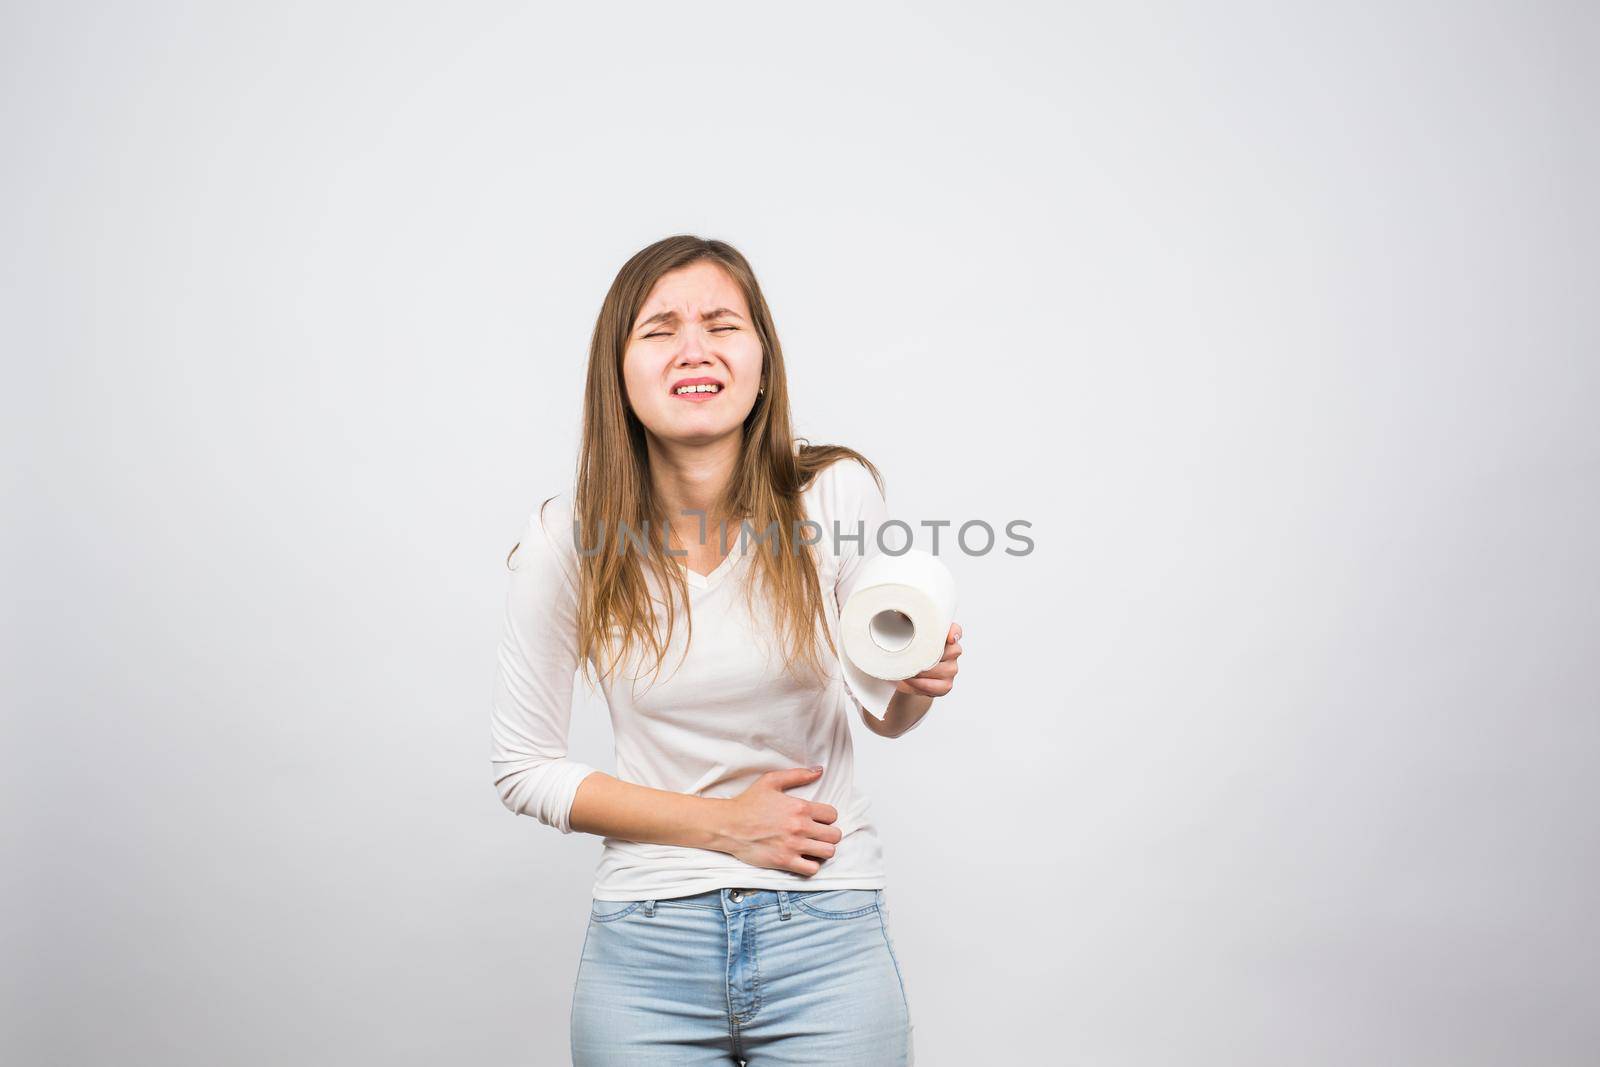 Woman with toilet paper and problems with her digestive system.